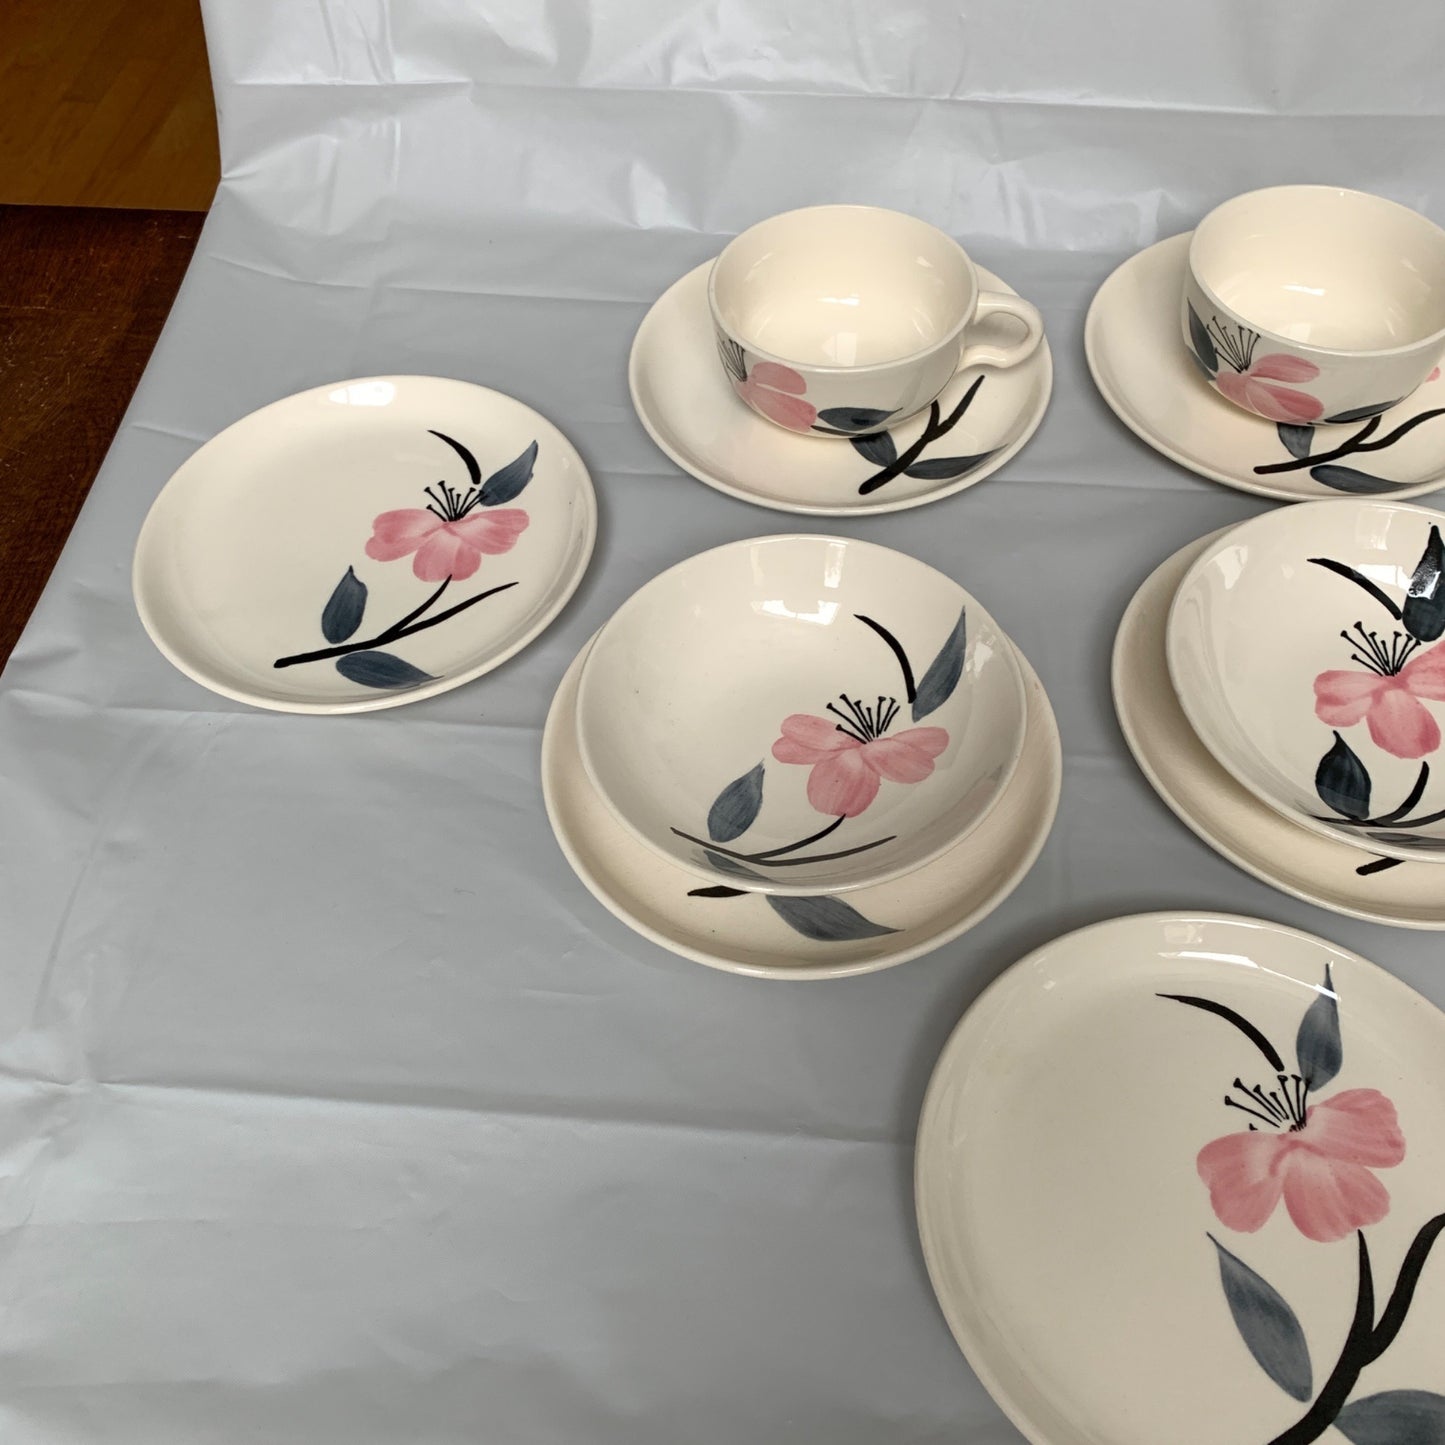 Vintage Unmarked Handpainted White Pink Floral Leaves Cups Saucers Small Plates Set